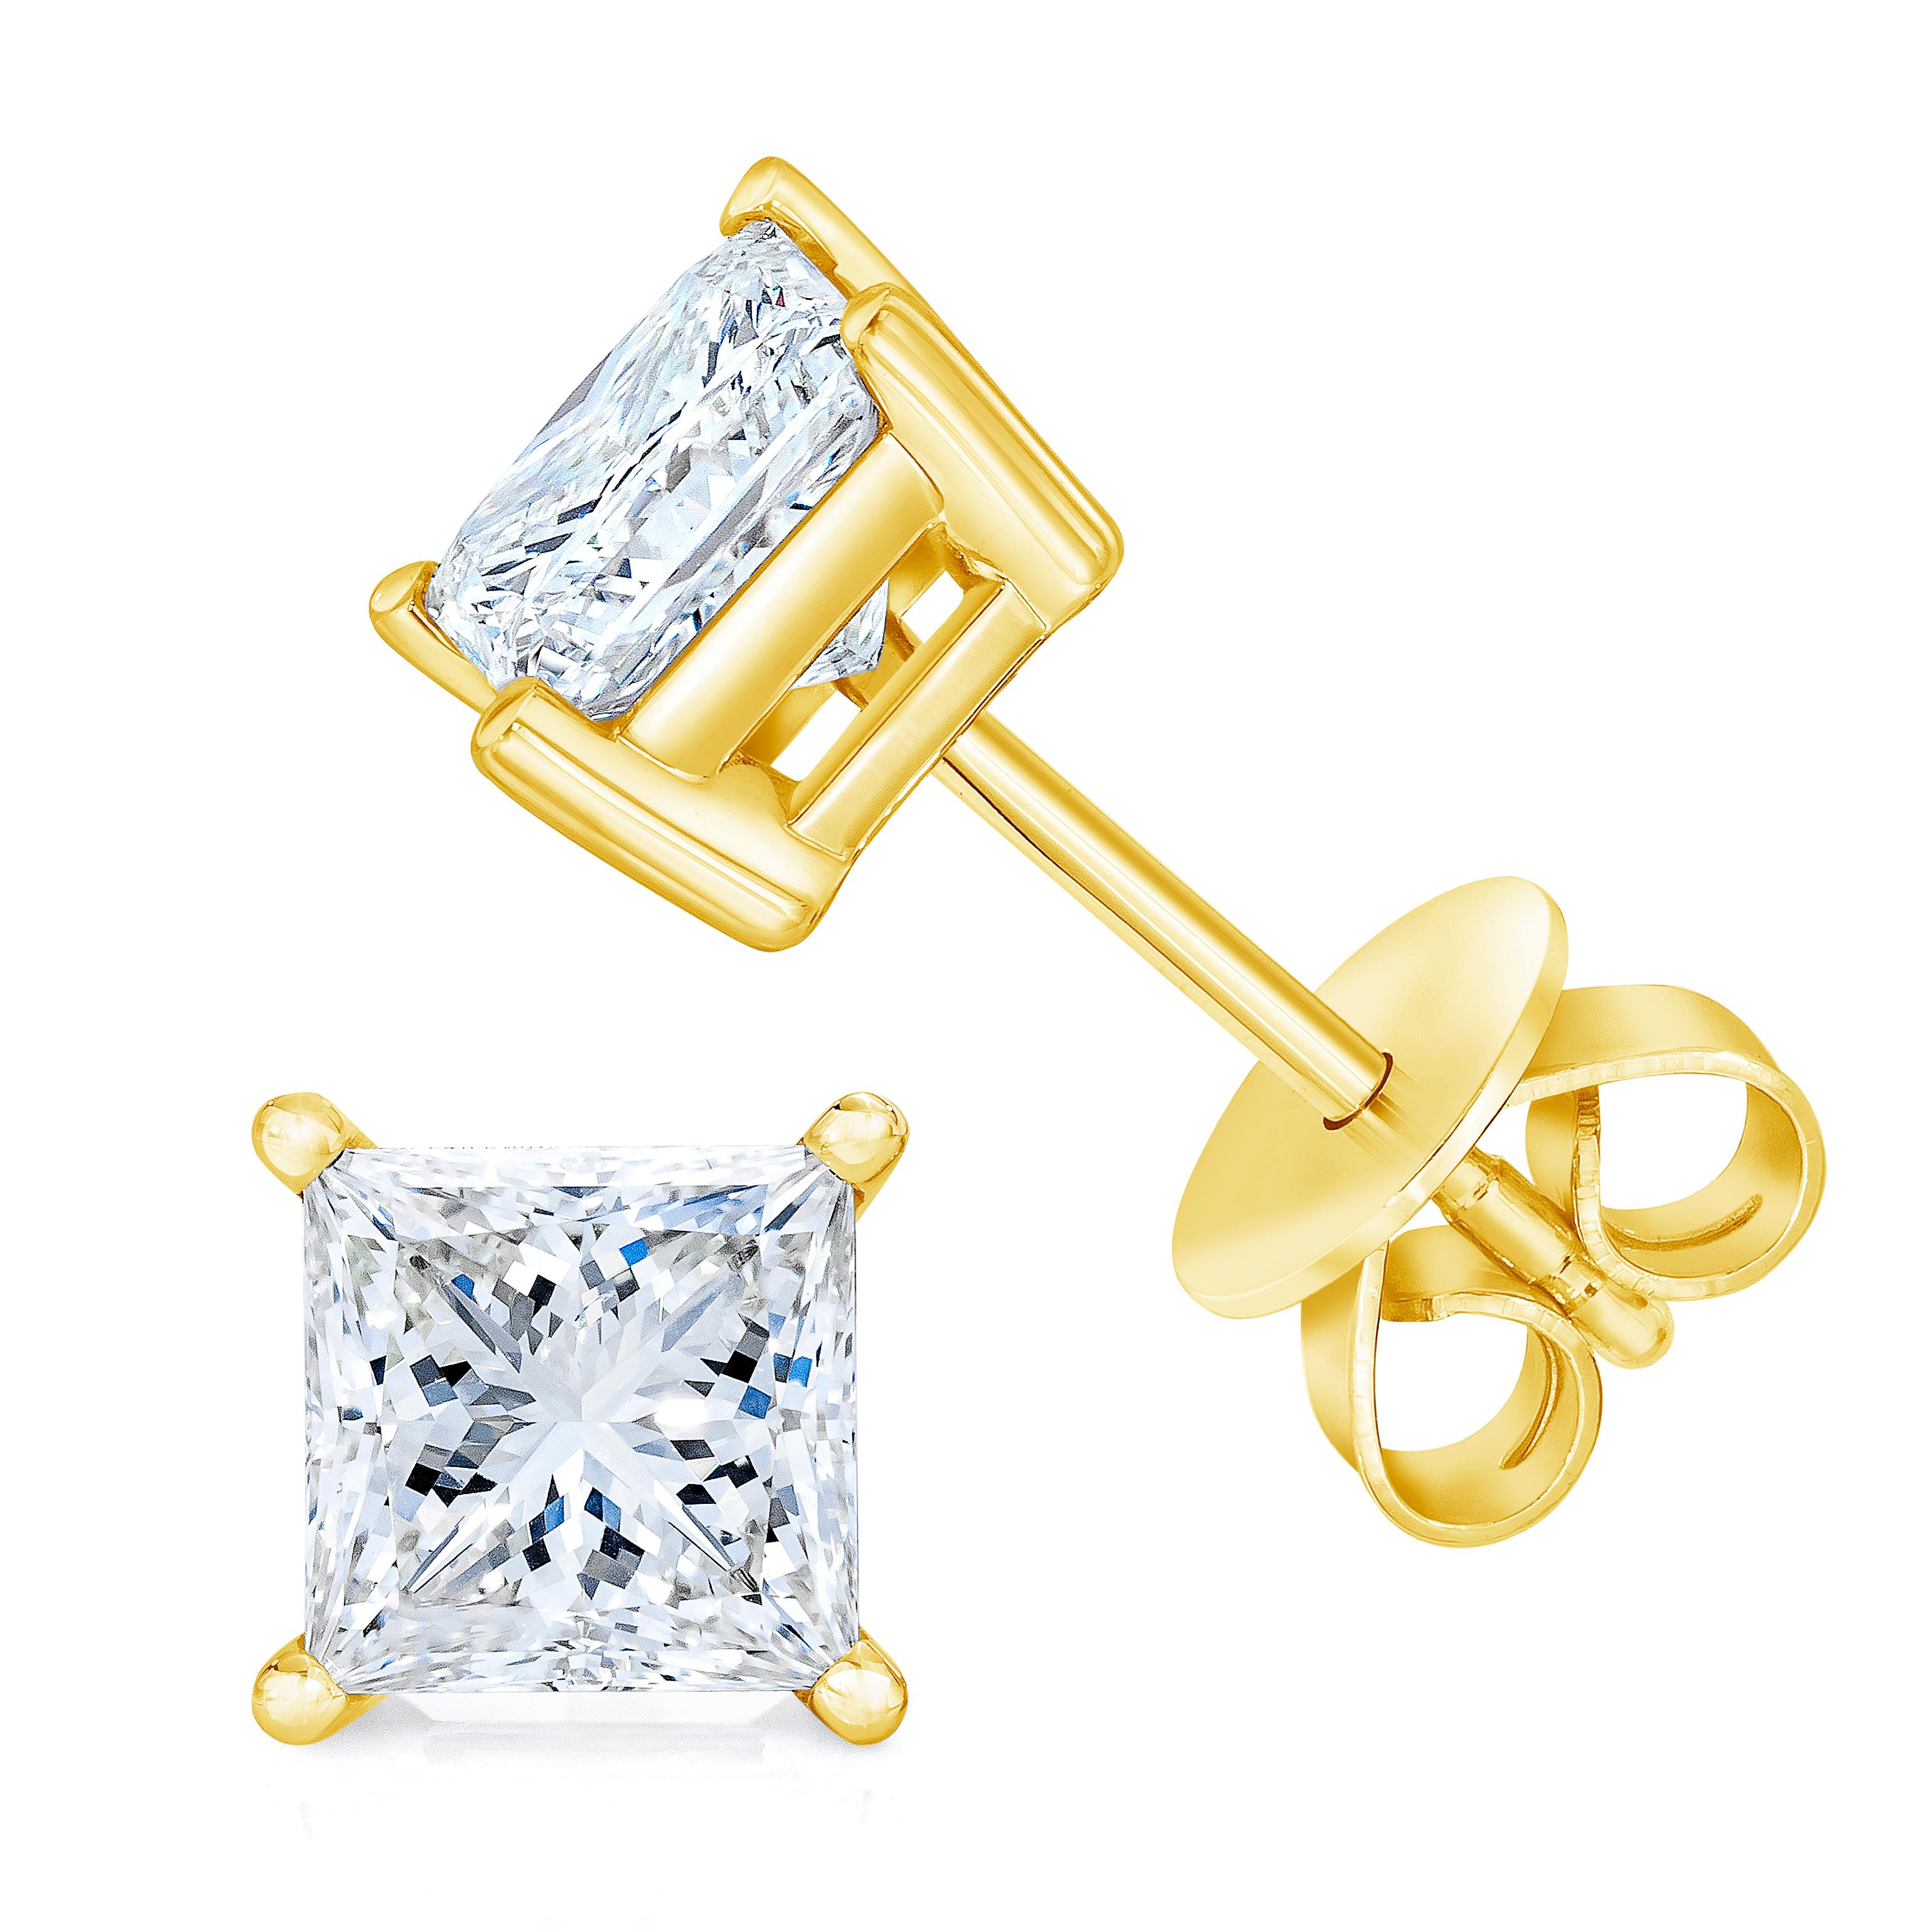 Frame her face with the bold and impressive look of these fabulous princess cut diamond solitaire stud earrings. Crafted in 14K yellow gold, each earring features a mesmerizing 0.5 ct. diamond solitaire in a four-prong setting. Captivating with 1.0